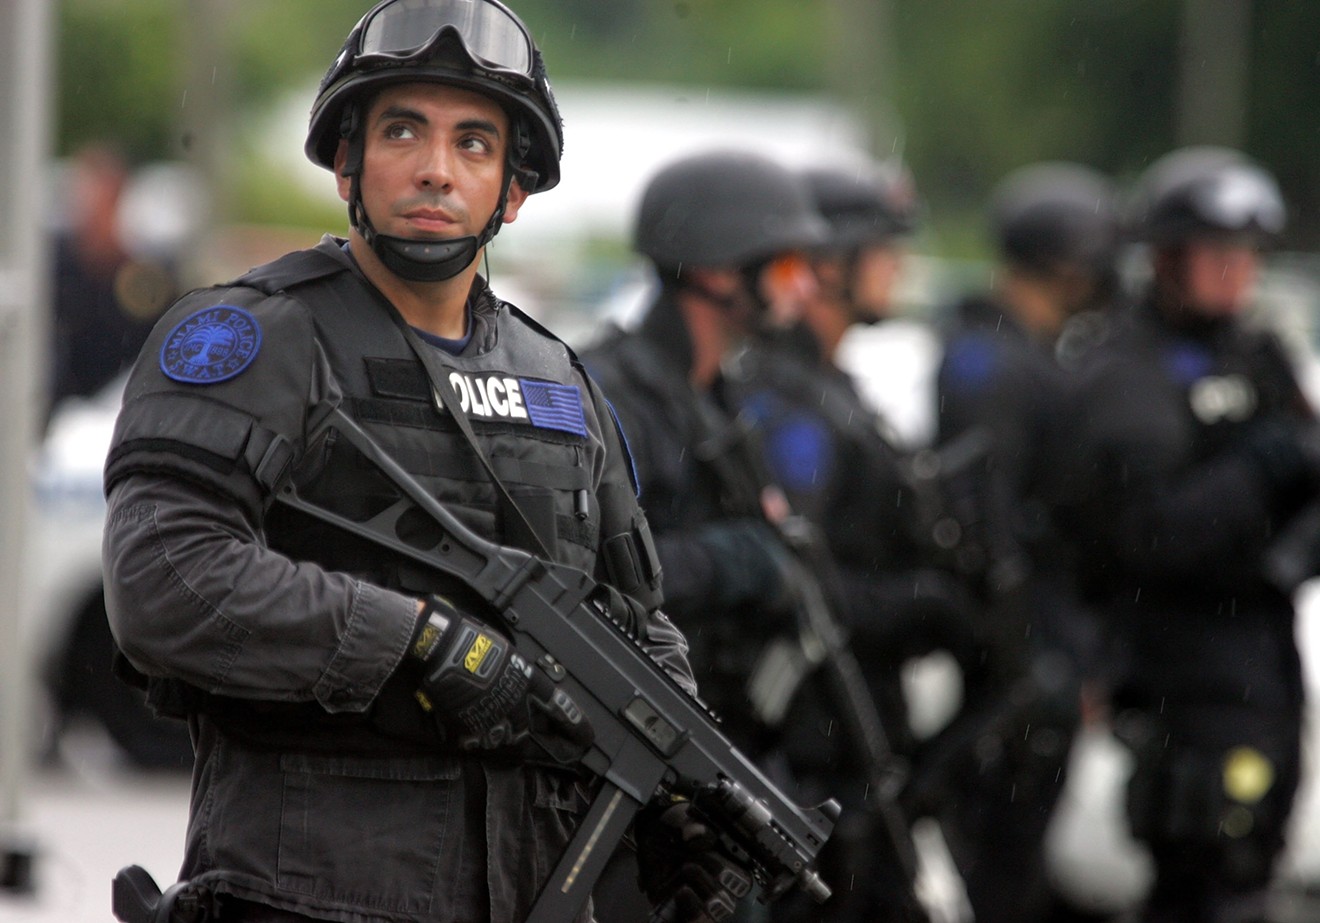 A Miami Police Department SWAT team member on the scene of a drug raid in Liberty City in 2006.